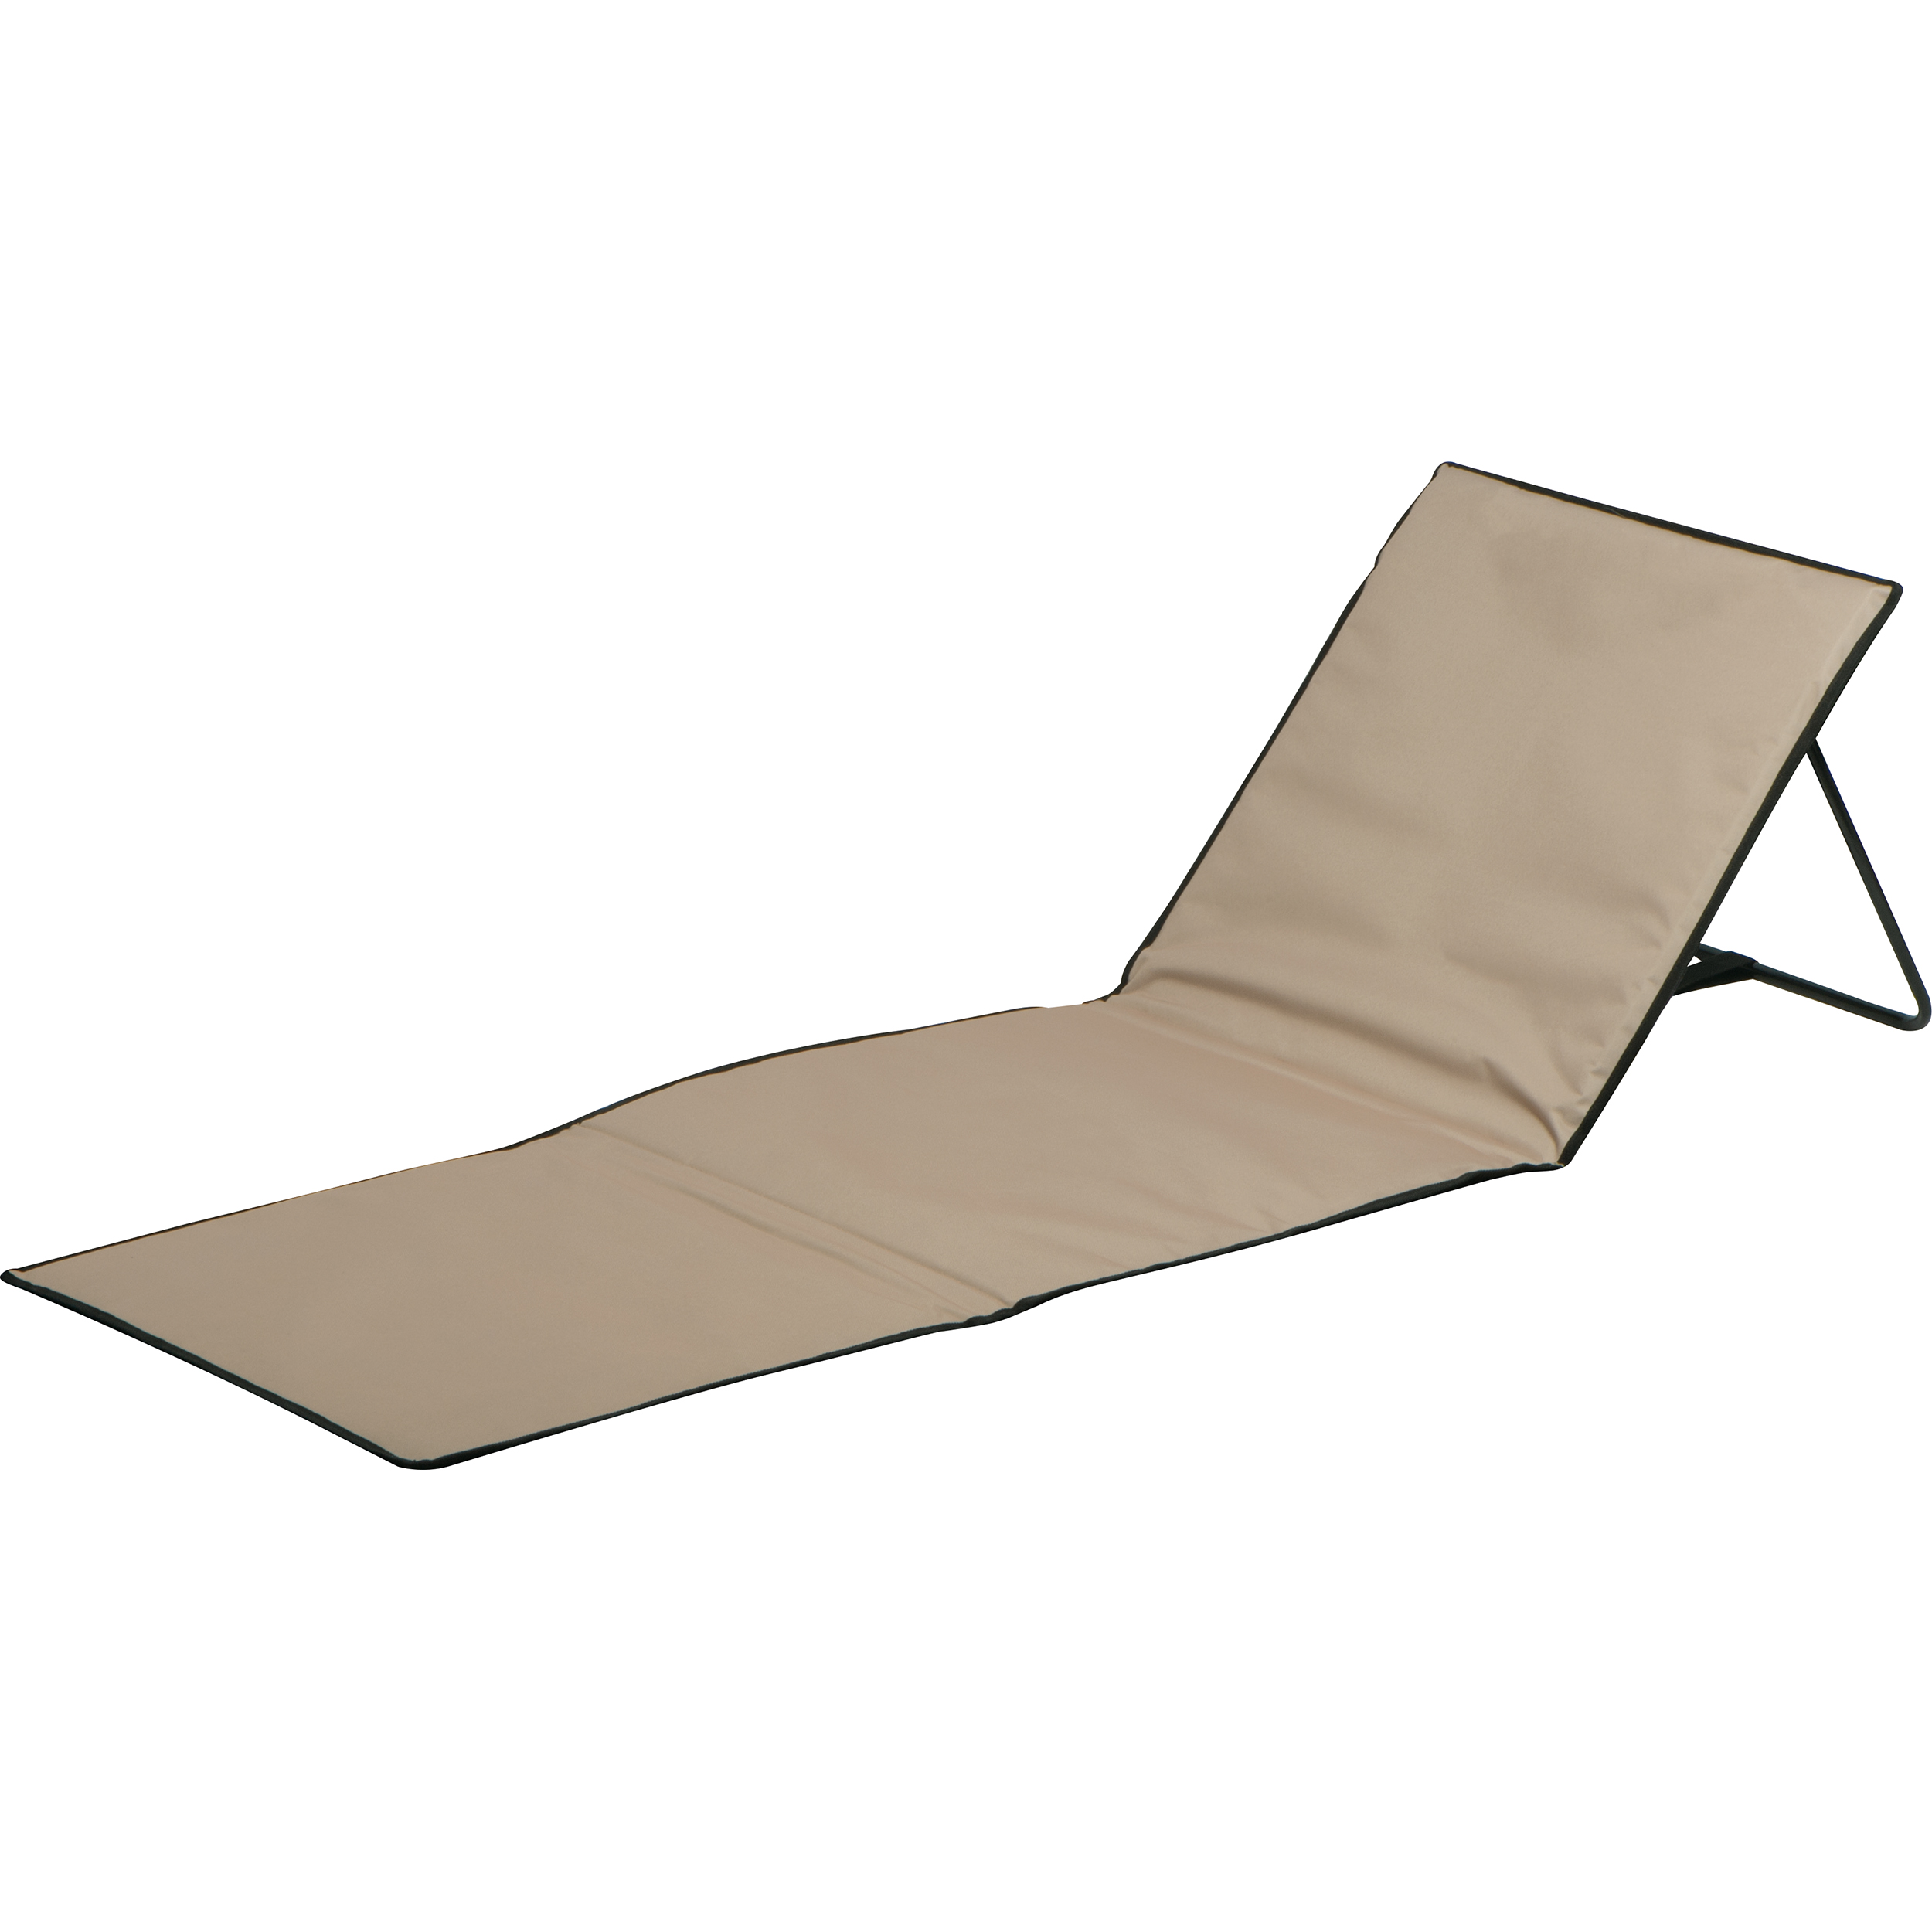 Beachmat with Headrest and Shoulderstraps